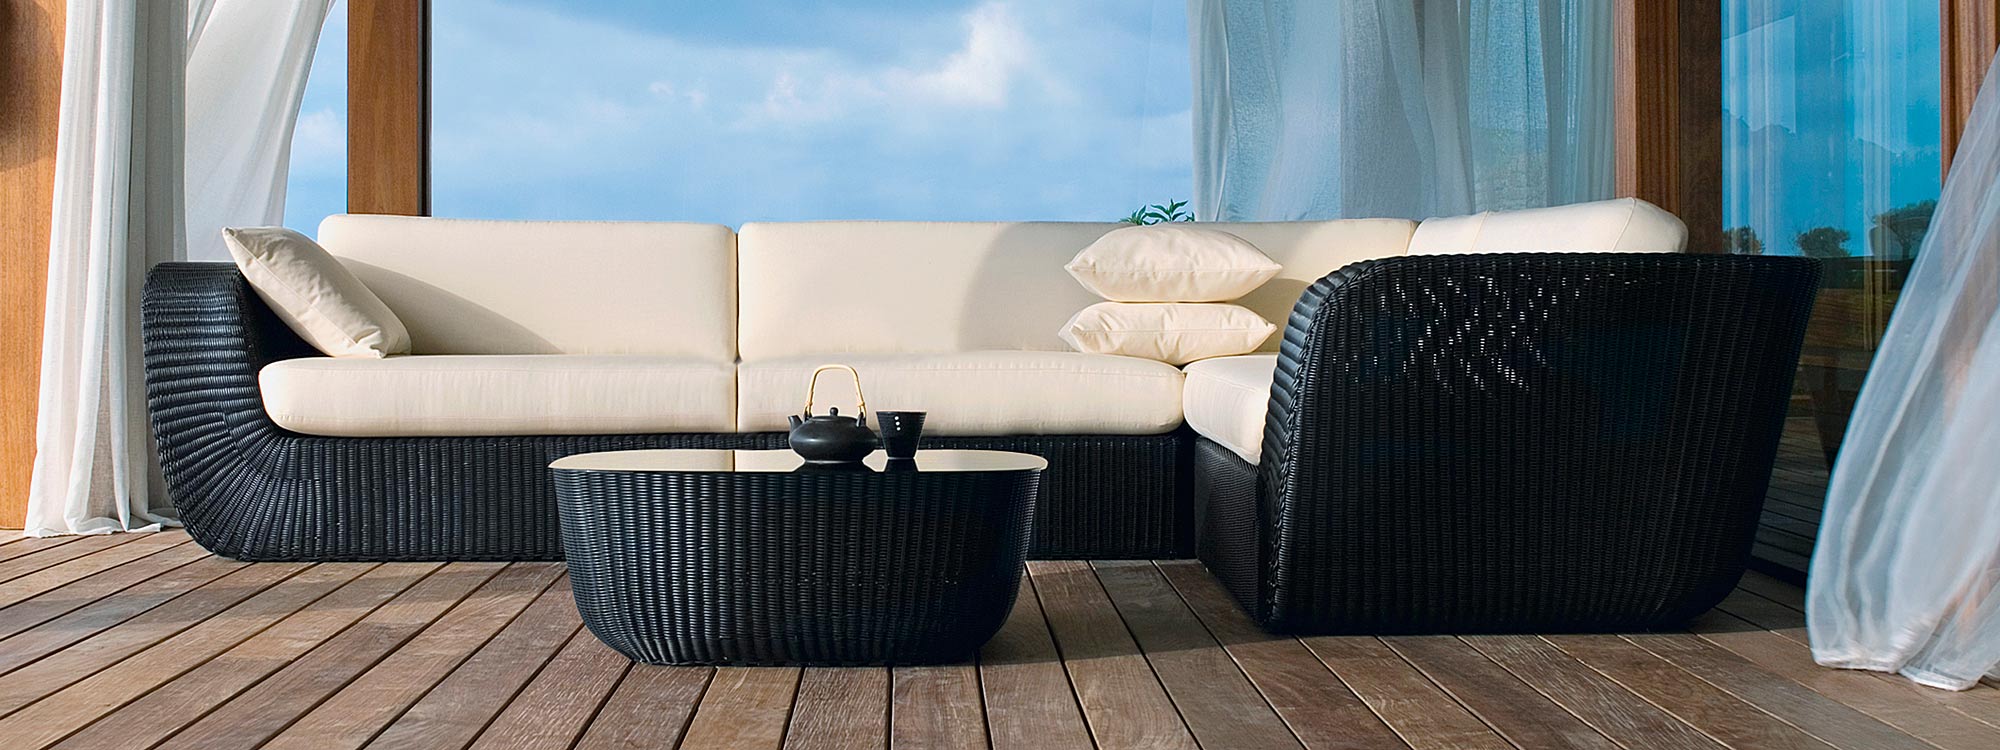 Image of black Savannah woven garden corner sofa with white cushions by Cane-line